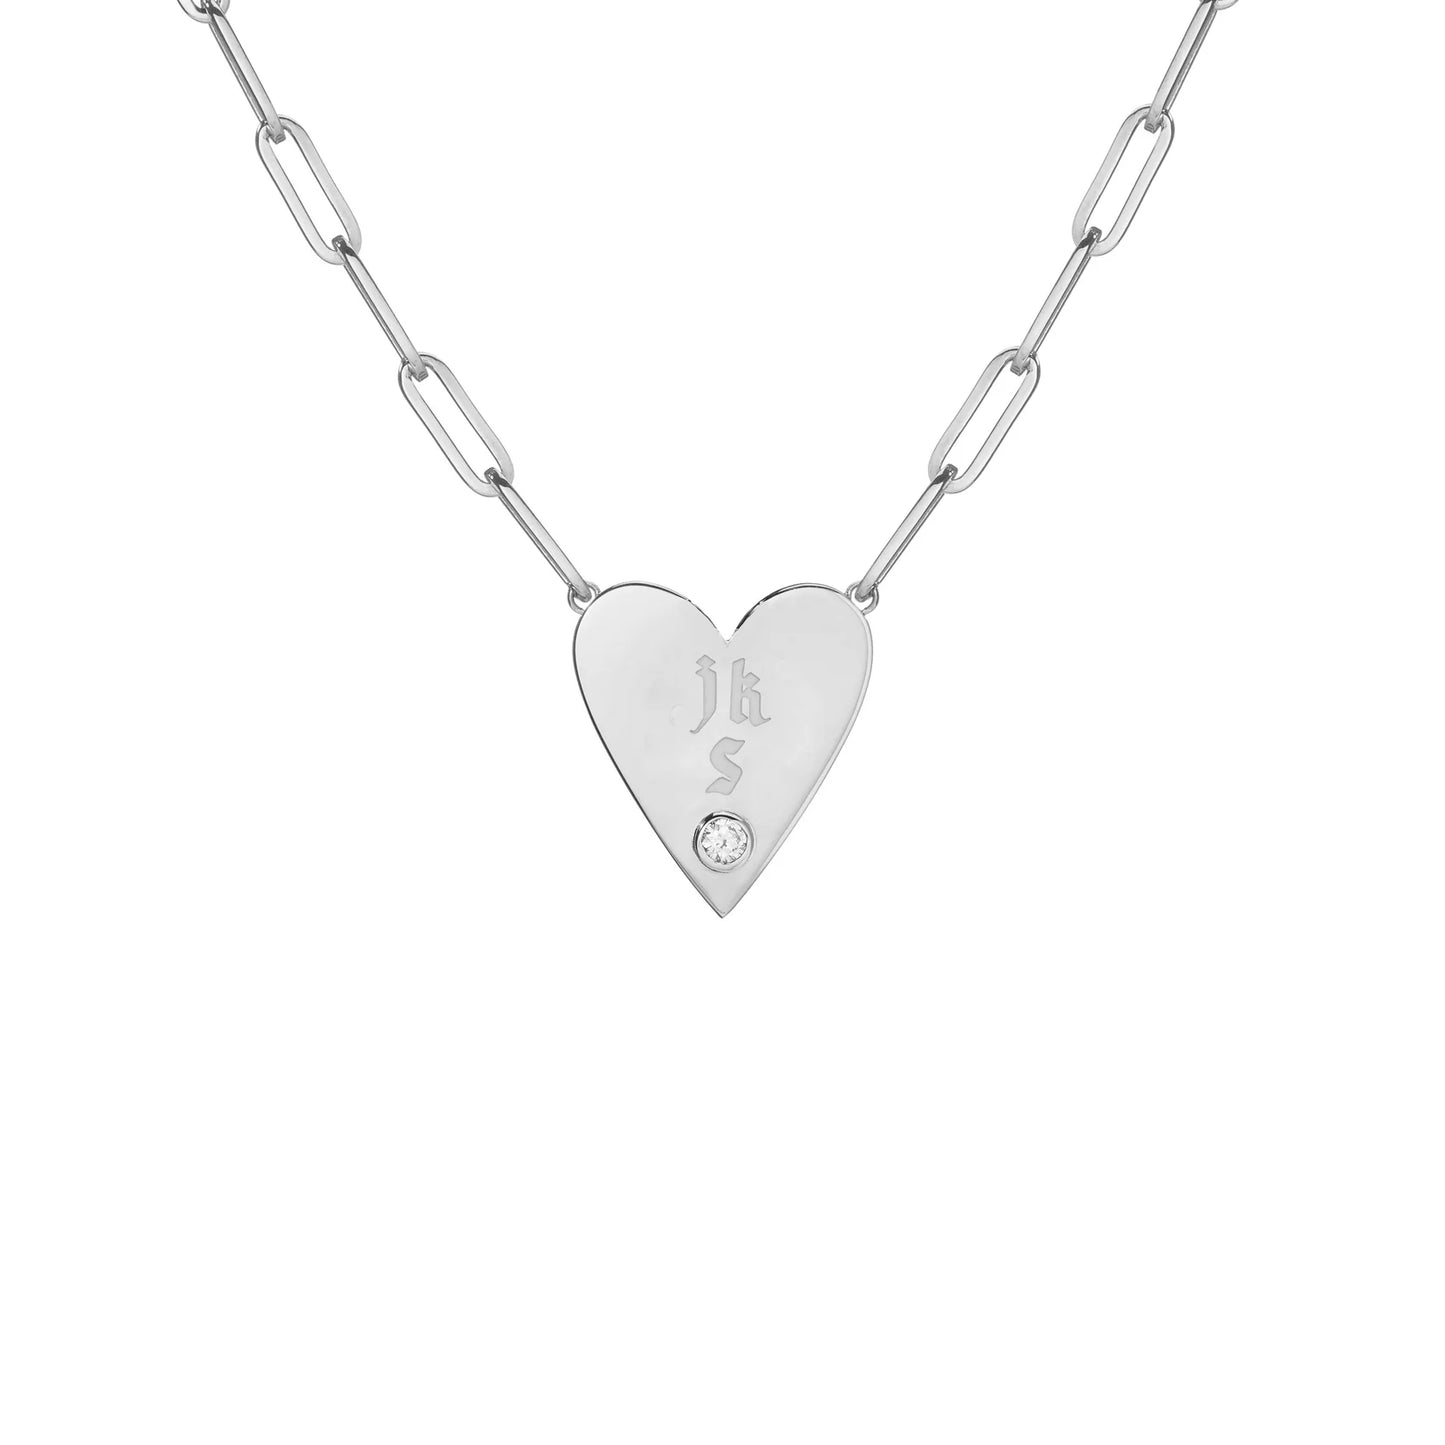 Large Family Gothic Heart Pendant with 3 Letters and Diamond